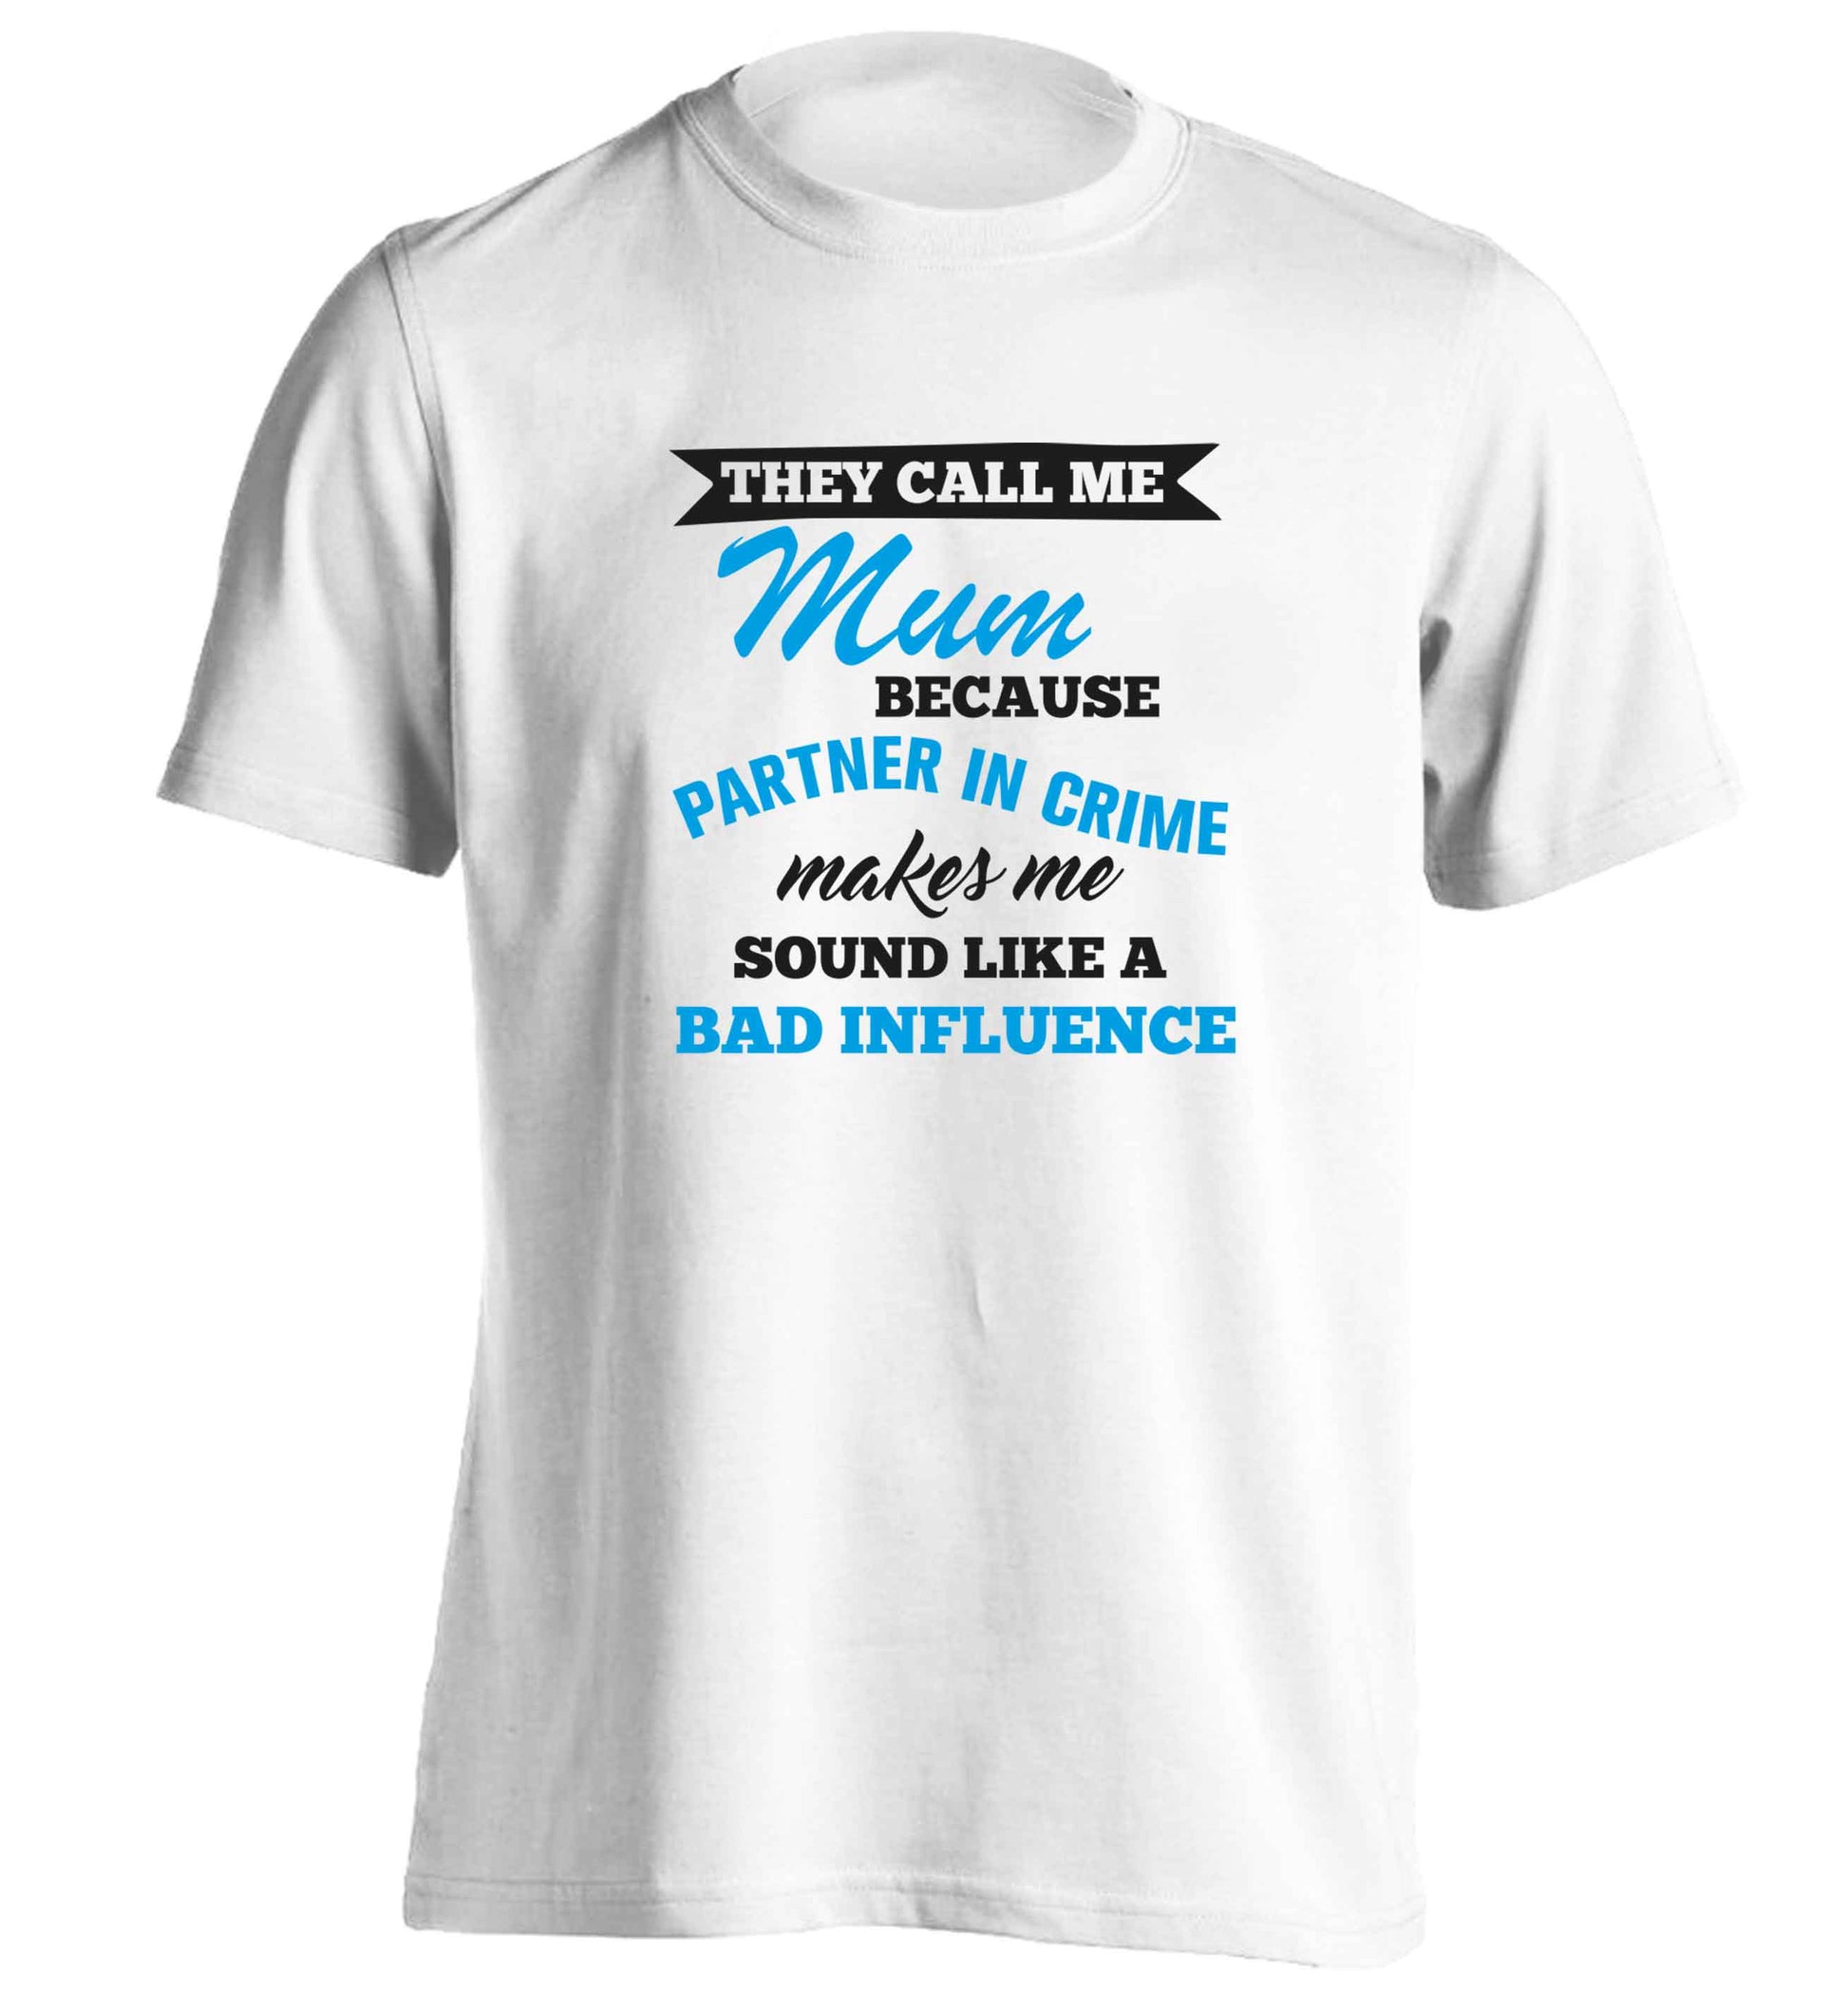 They call me mum because partner in crime makes me sound like a bad influence adults unisex white Tshirt 2XL